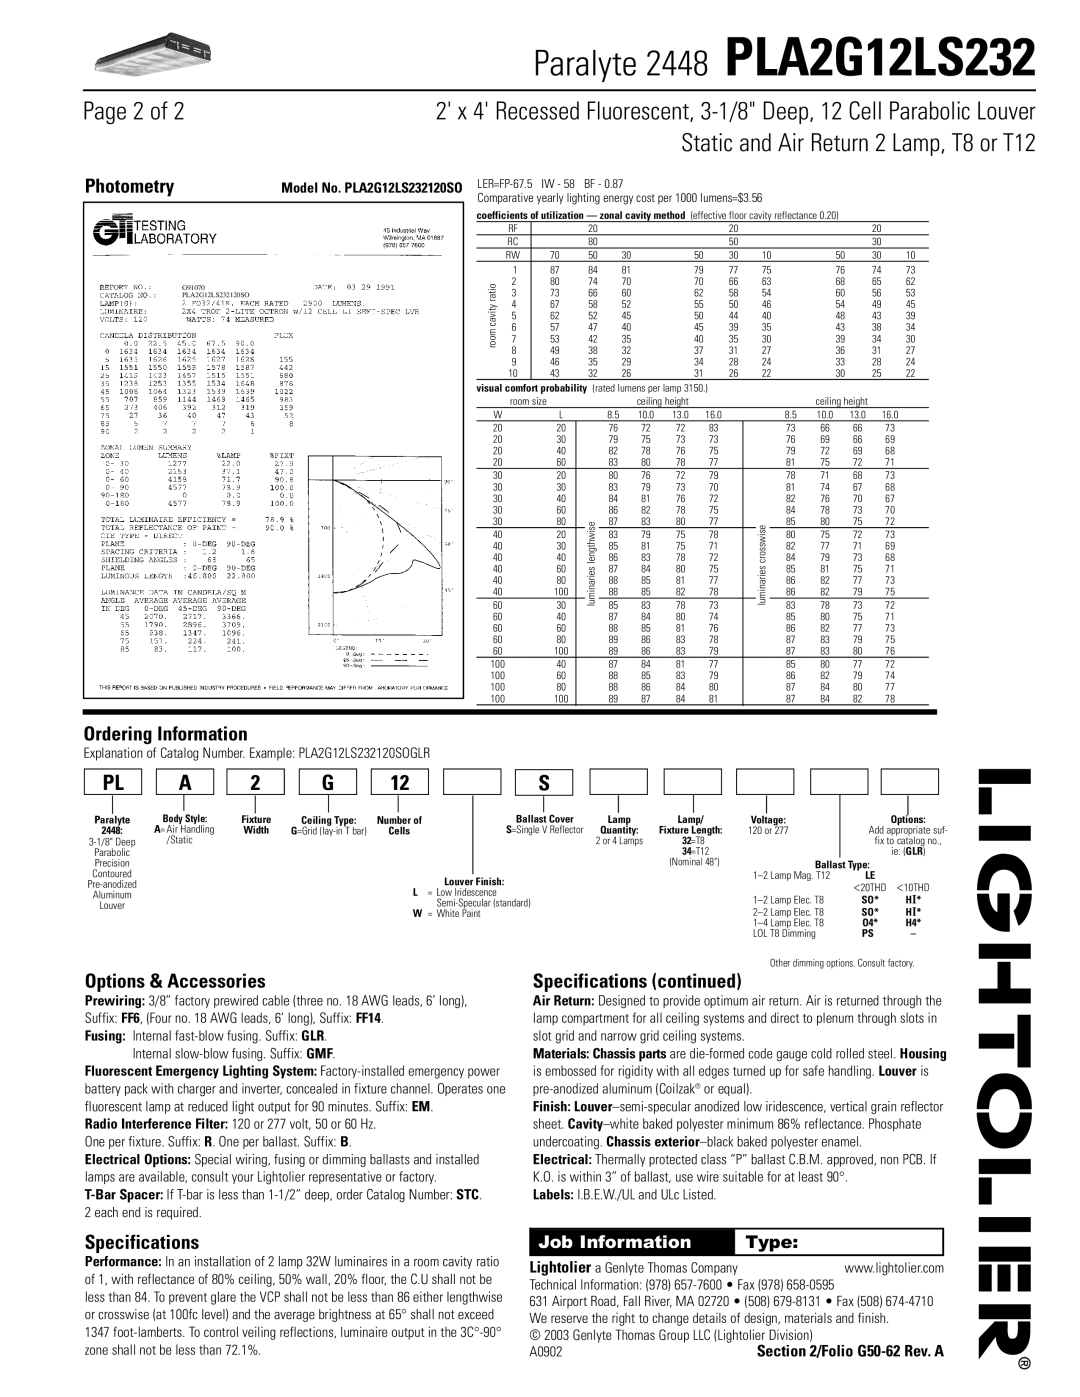 Lightolier PLA2G12LS232 dimensions Page 2 of, Photometry, Ordering Information, Options & Accessories, Specifications, Type 